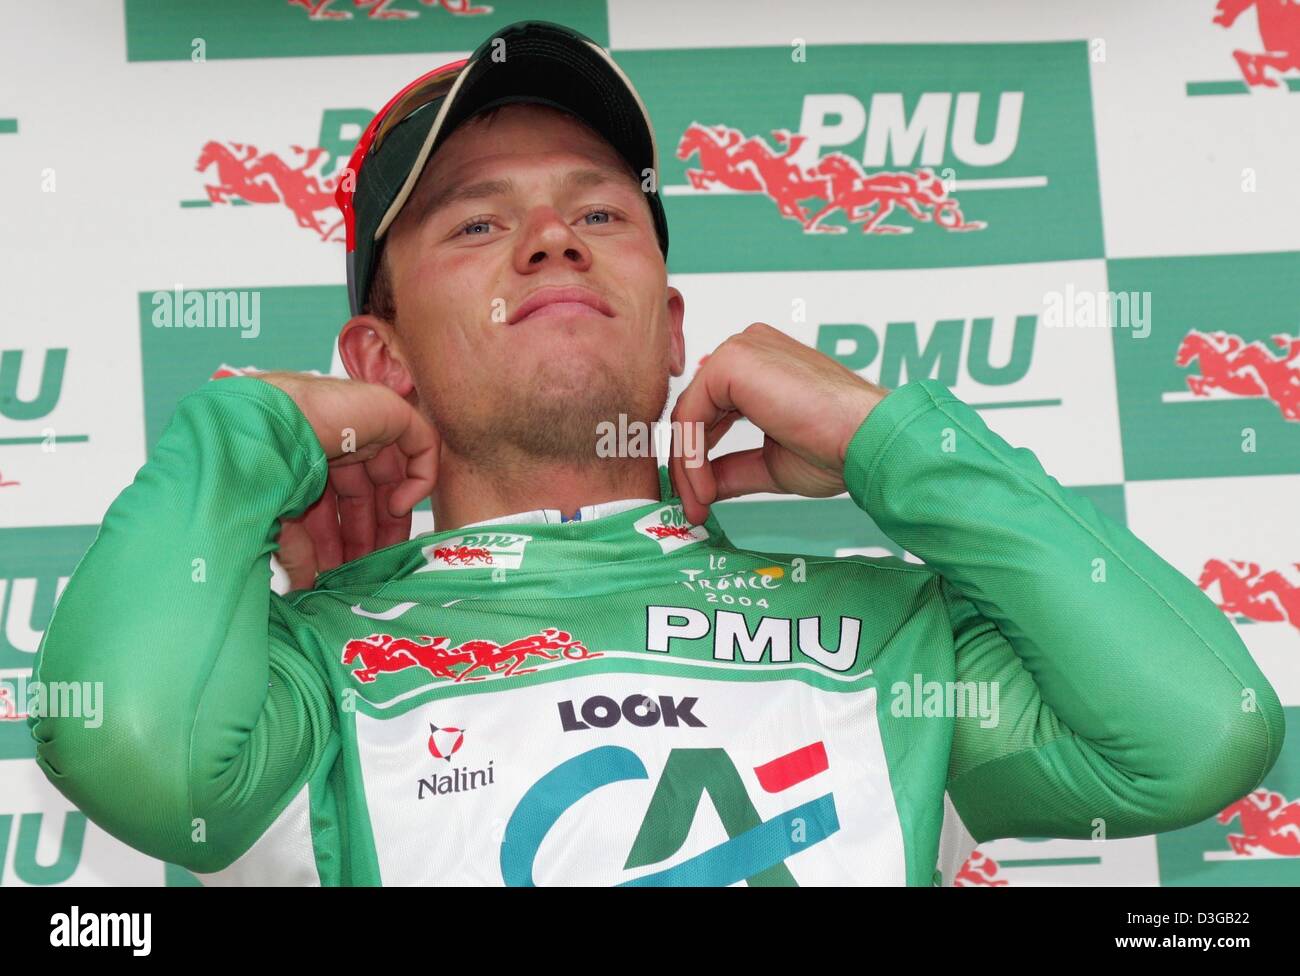 (dpa) - Norwegian Thor Hushovd of team Credit Agricole puts on the best sprinter's green jersey after the first stage of the Tour de France in Charleroi, Belgium, 4 July 2004. The first and 202.5km long stage of the 91st Tour de France cycling race took the cyclists from Liege to Charleroi. Stock Photo